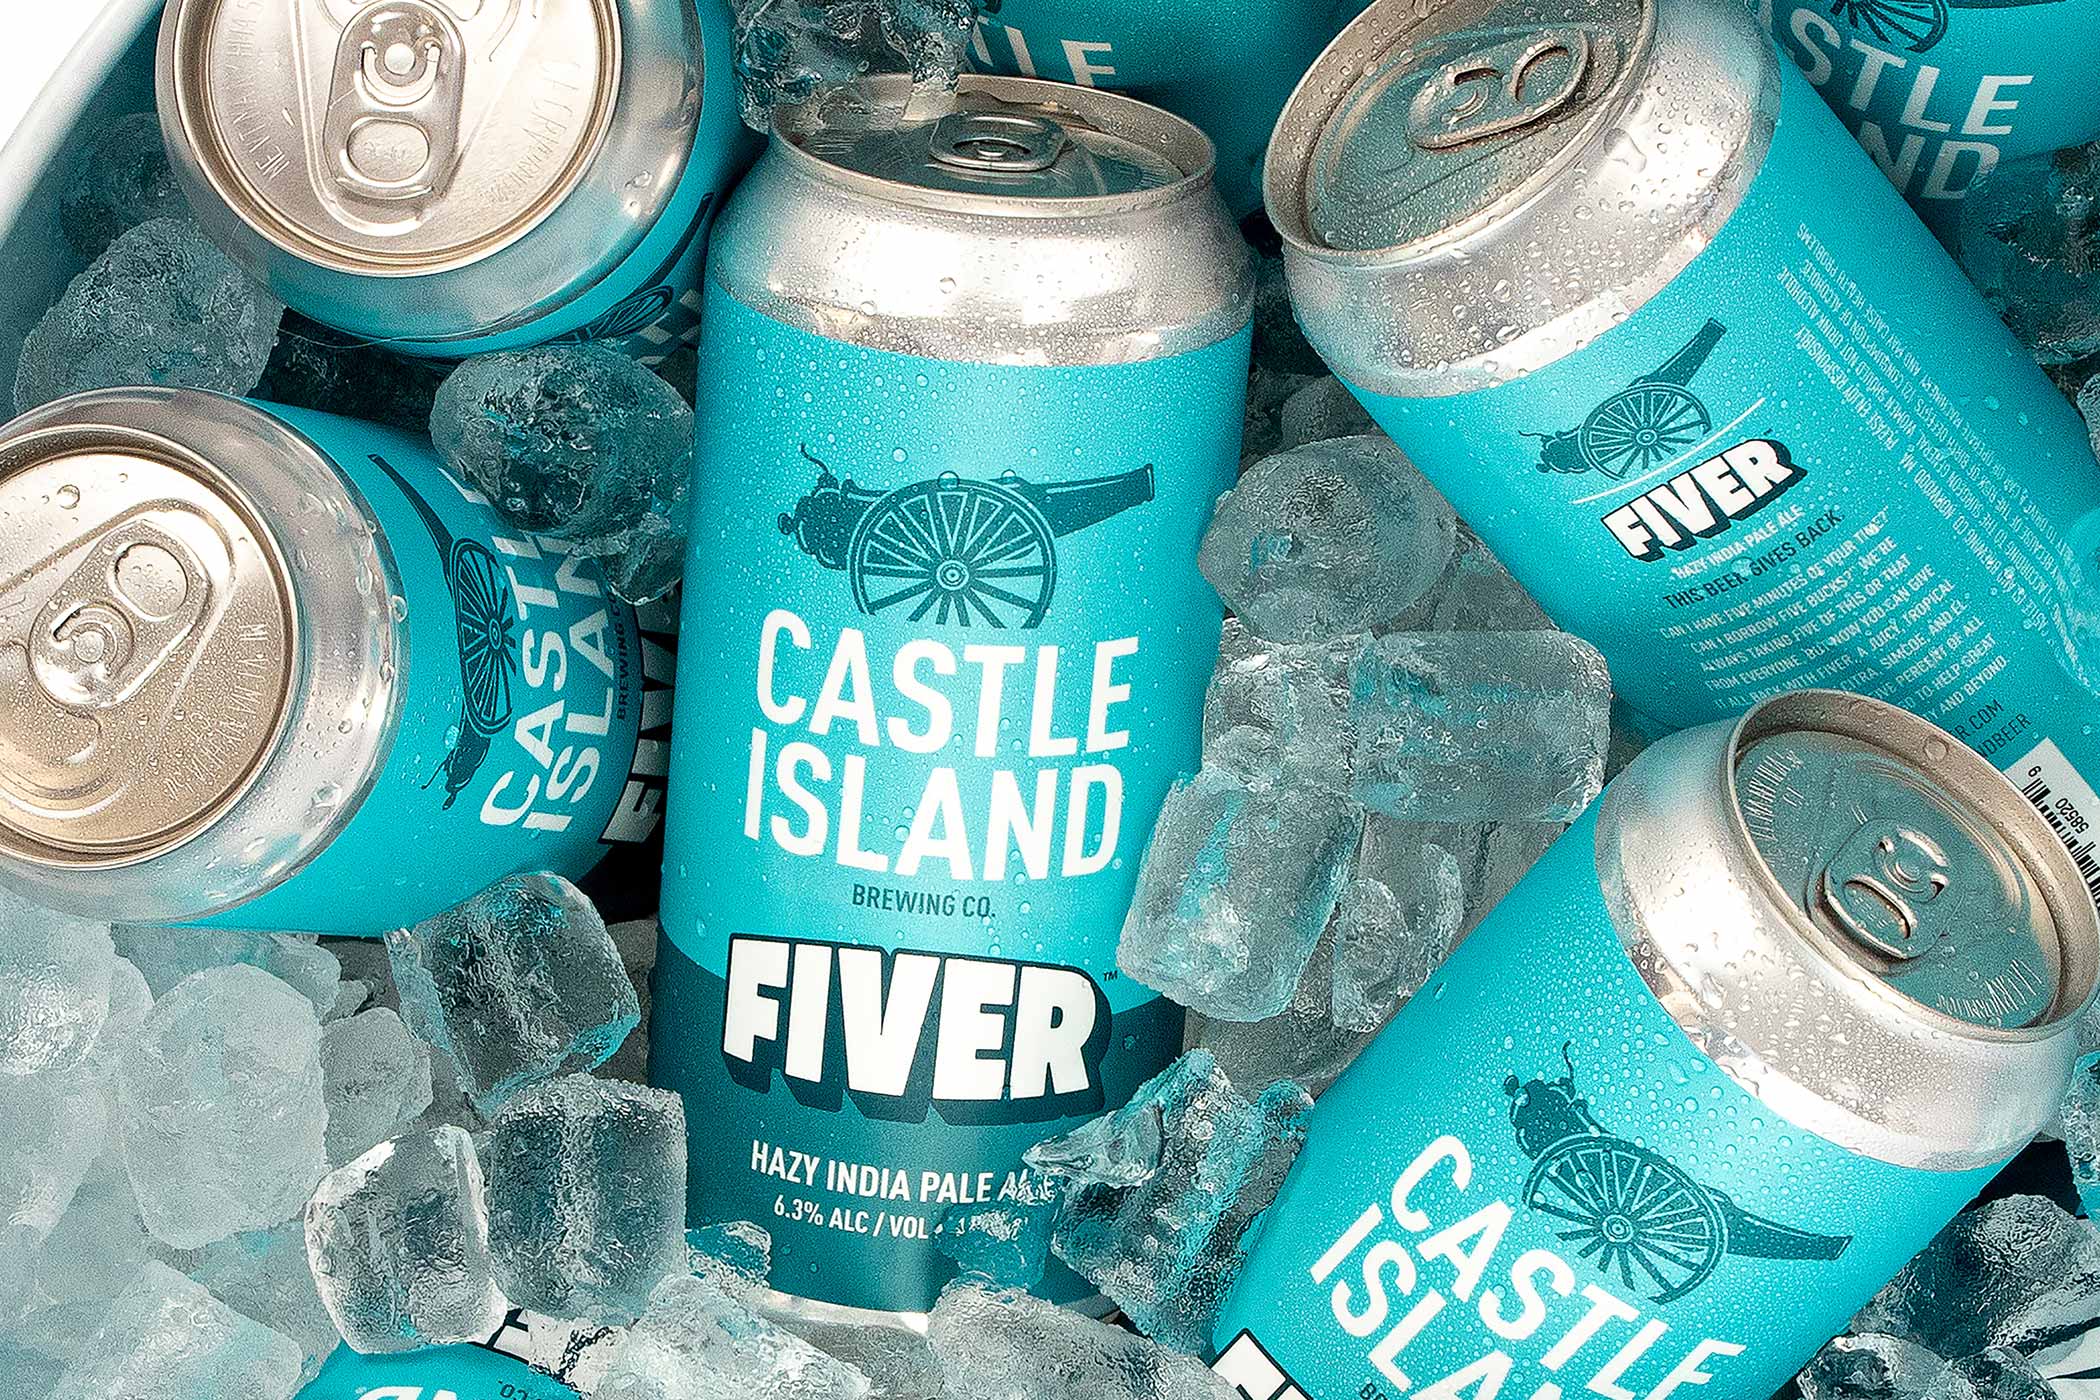 Castle Island’s Fiver Initiative Launches a Legacy in the Local Community